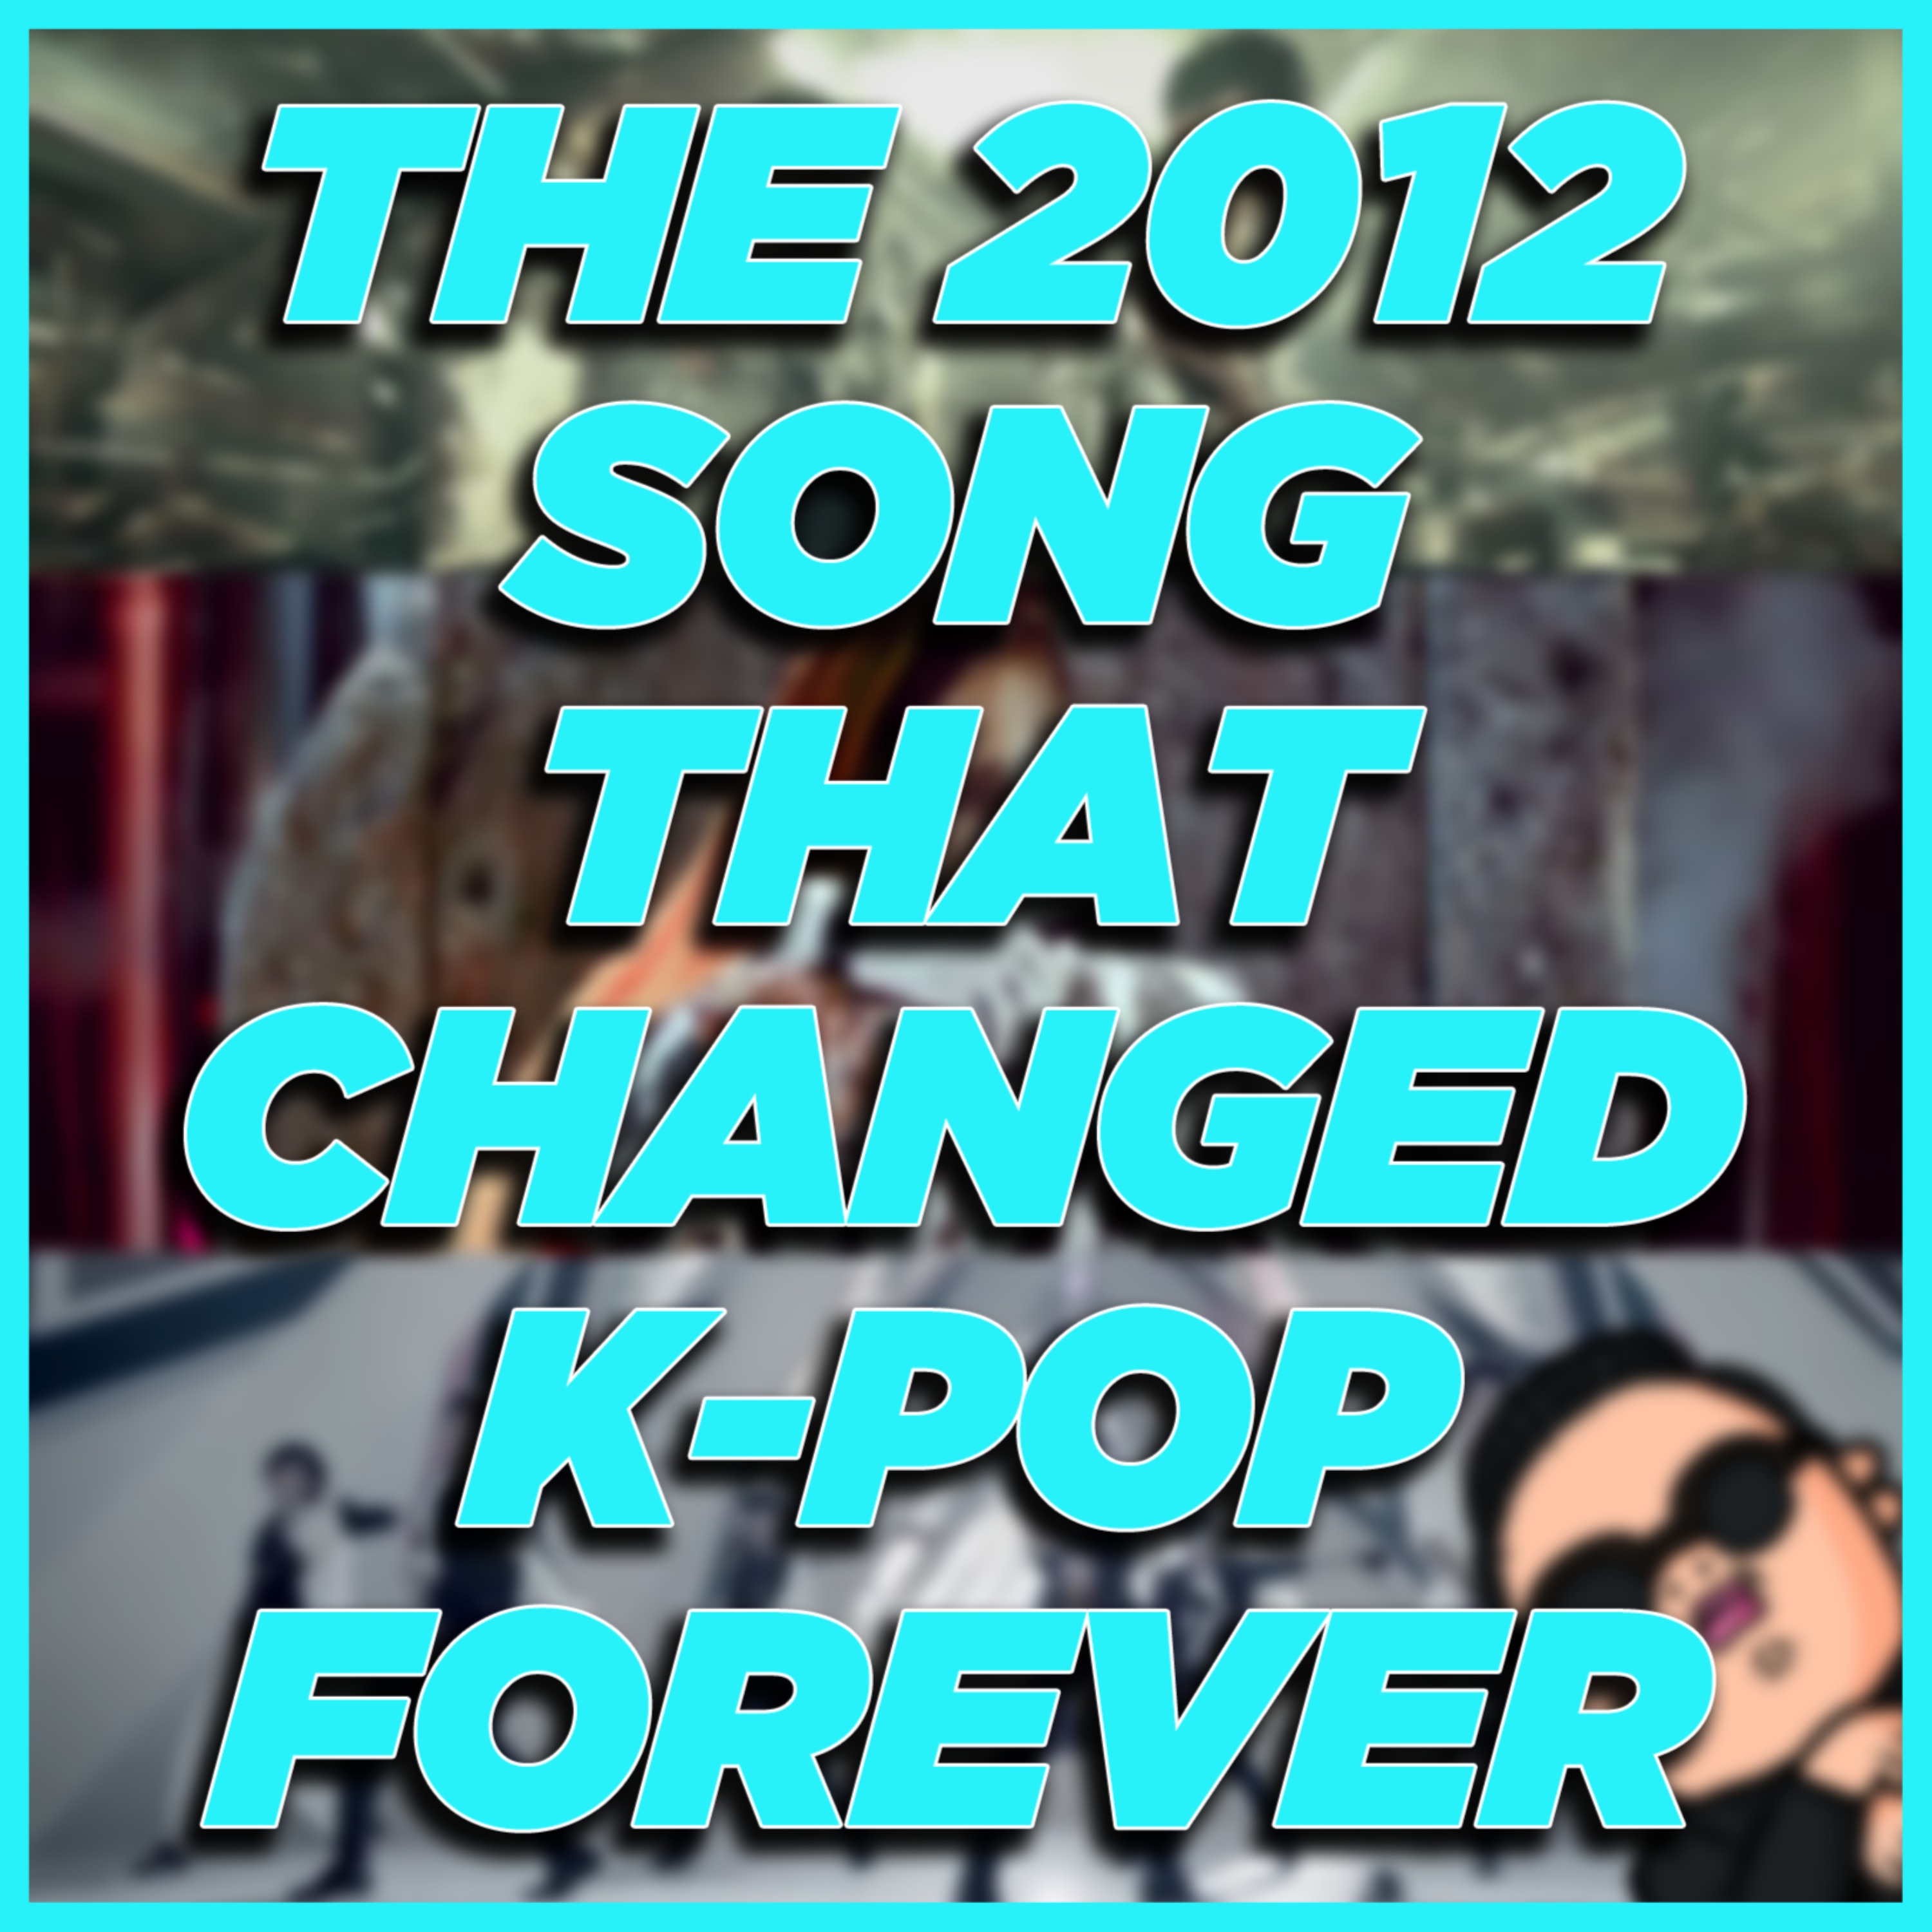 The Most Memorable K-Pop Song of 2012